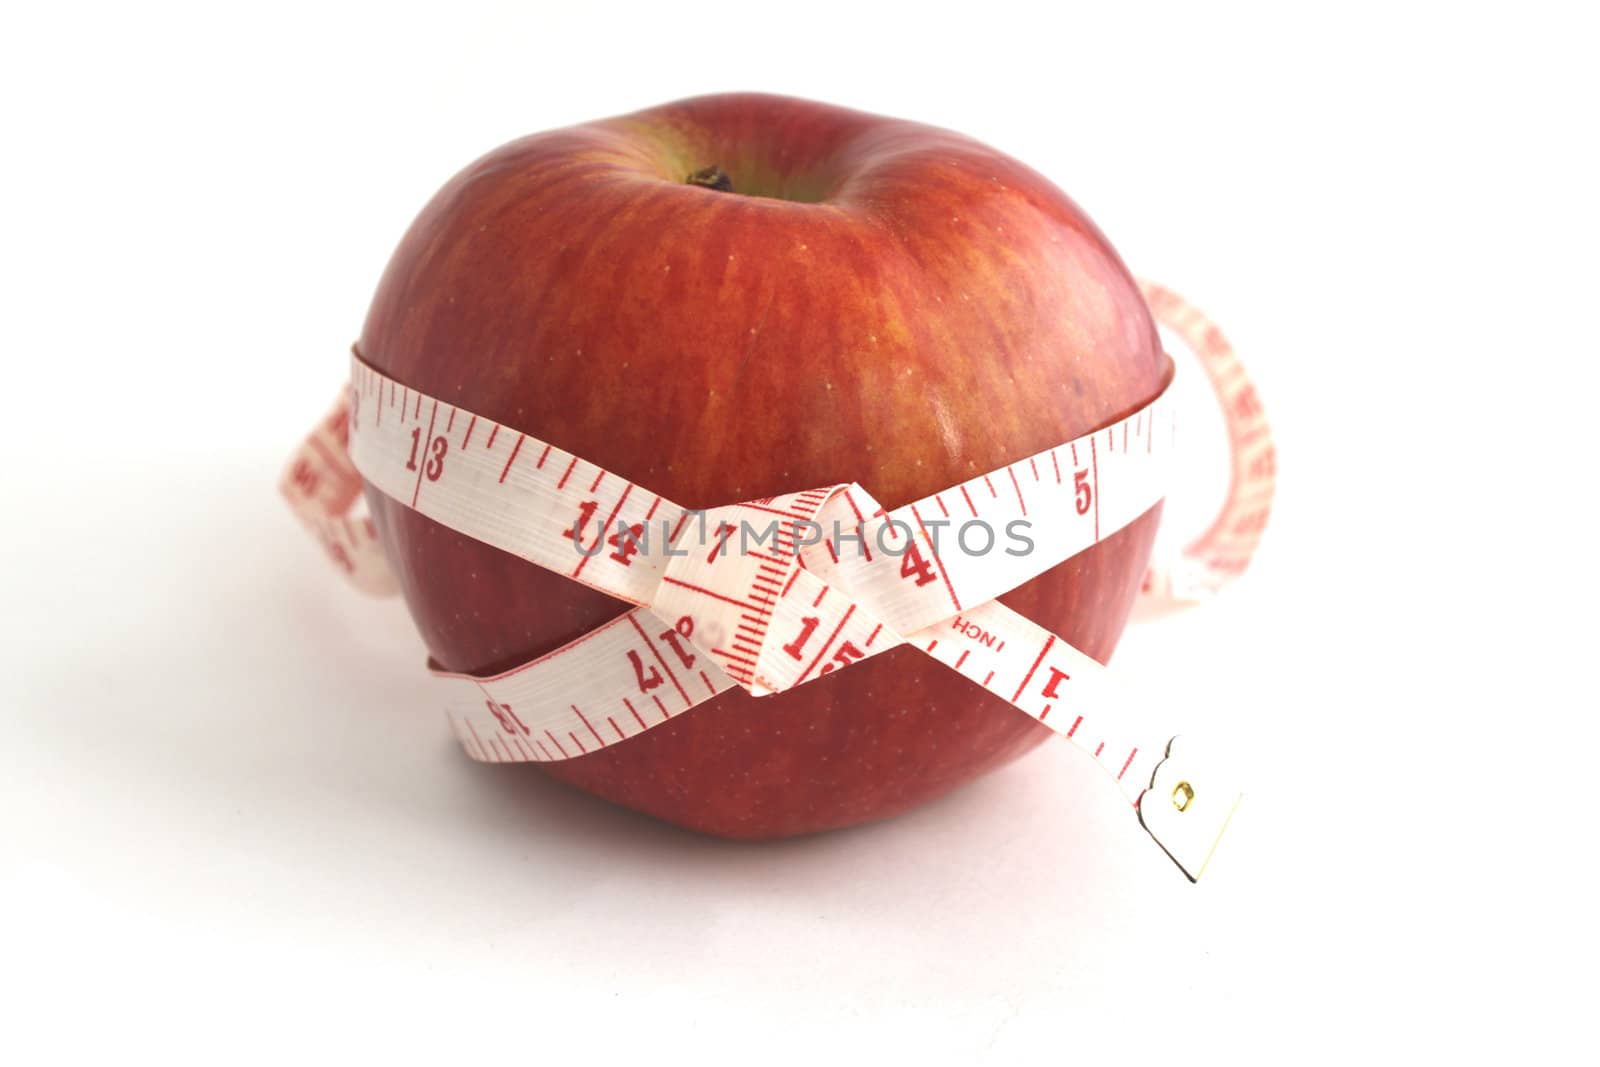 Apple and measuring tape isolated on white